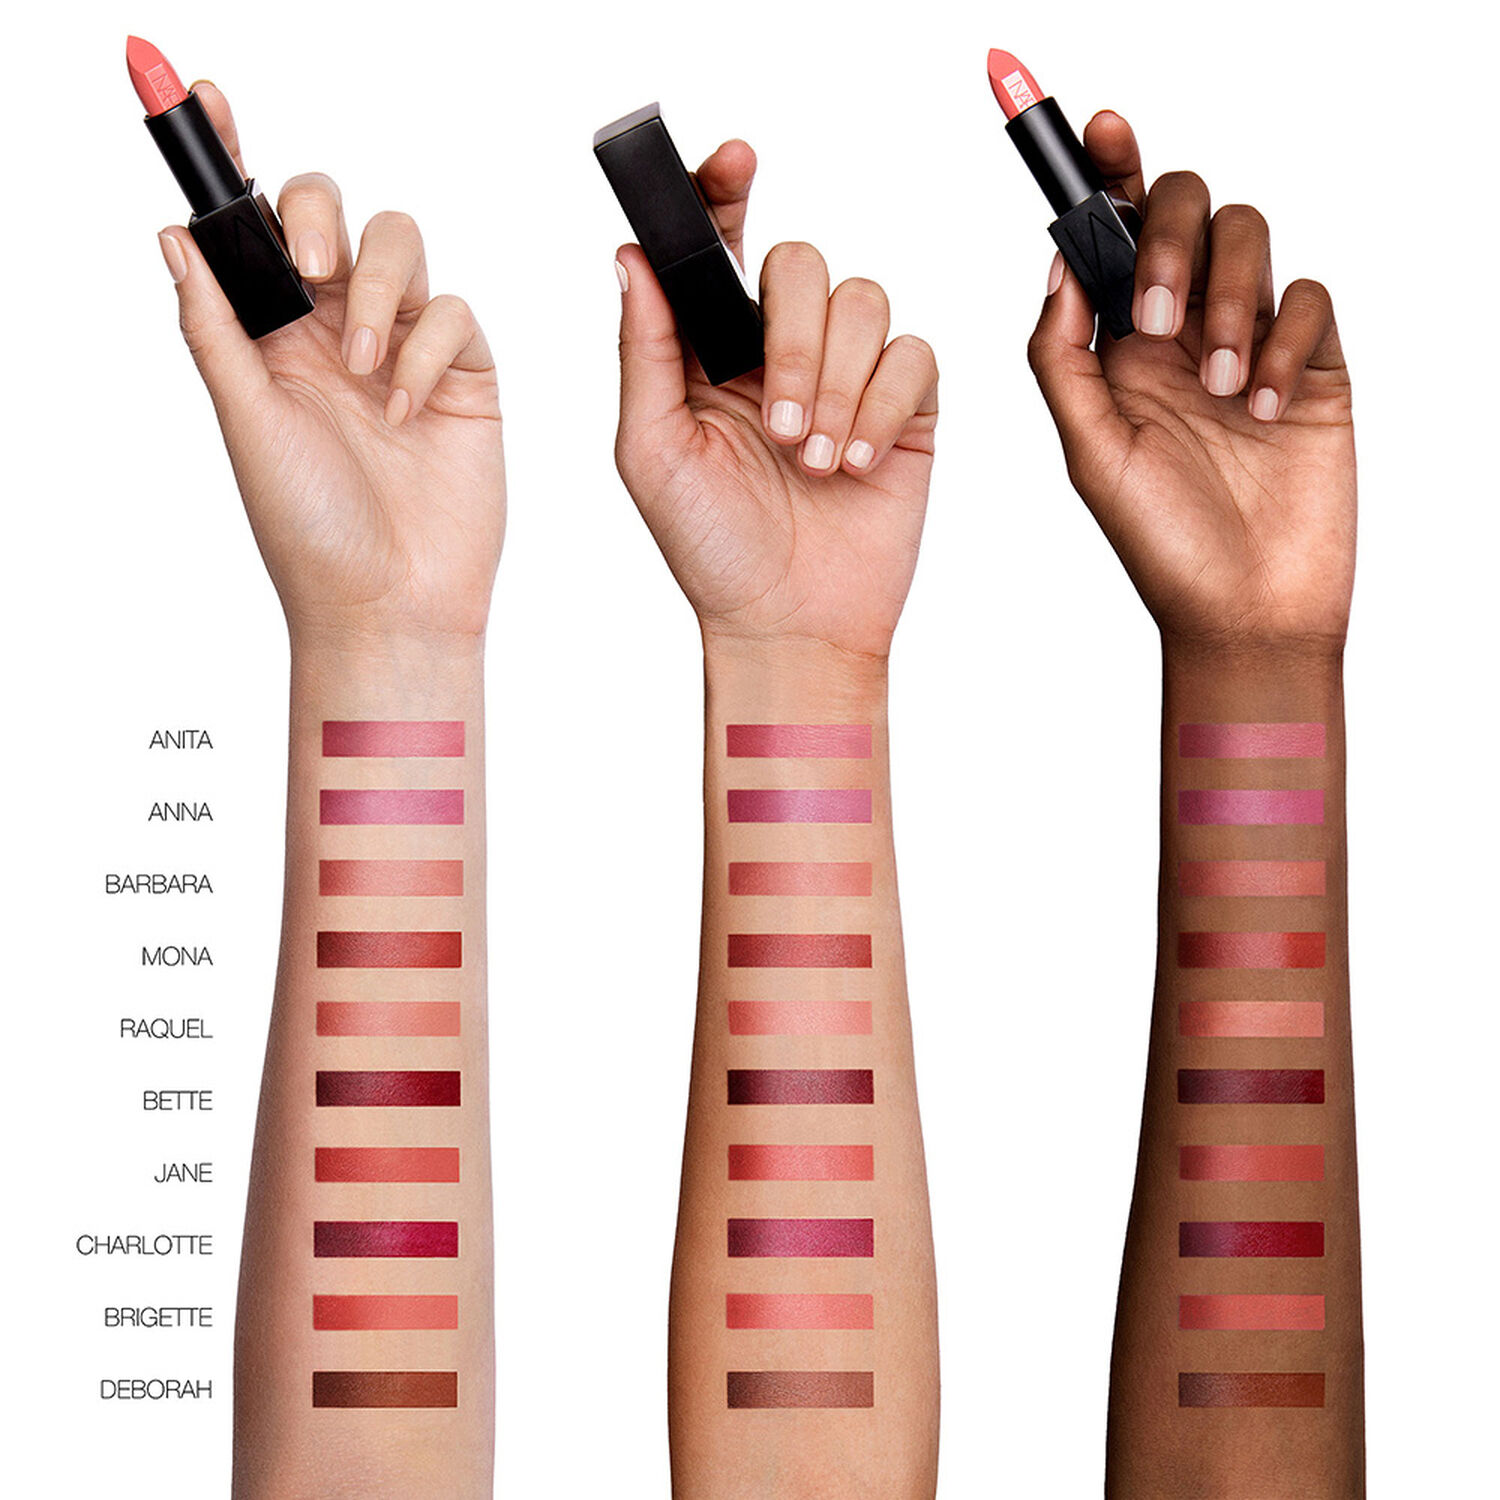 NARS Audacious Lipstick Swatches Shades Colors welche Farbe A-D